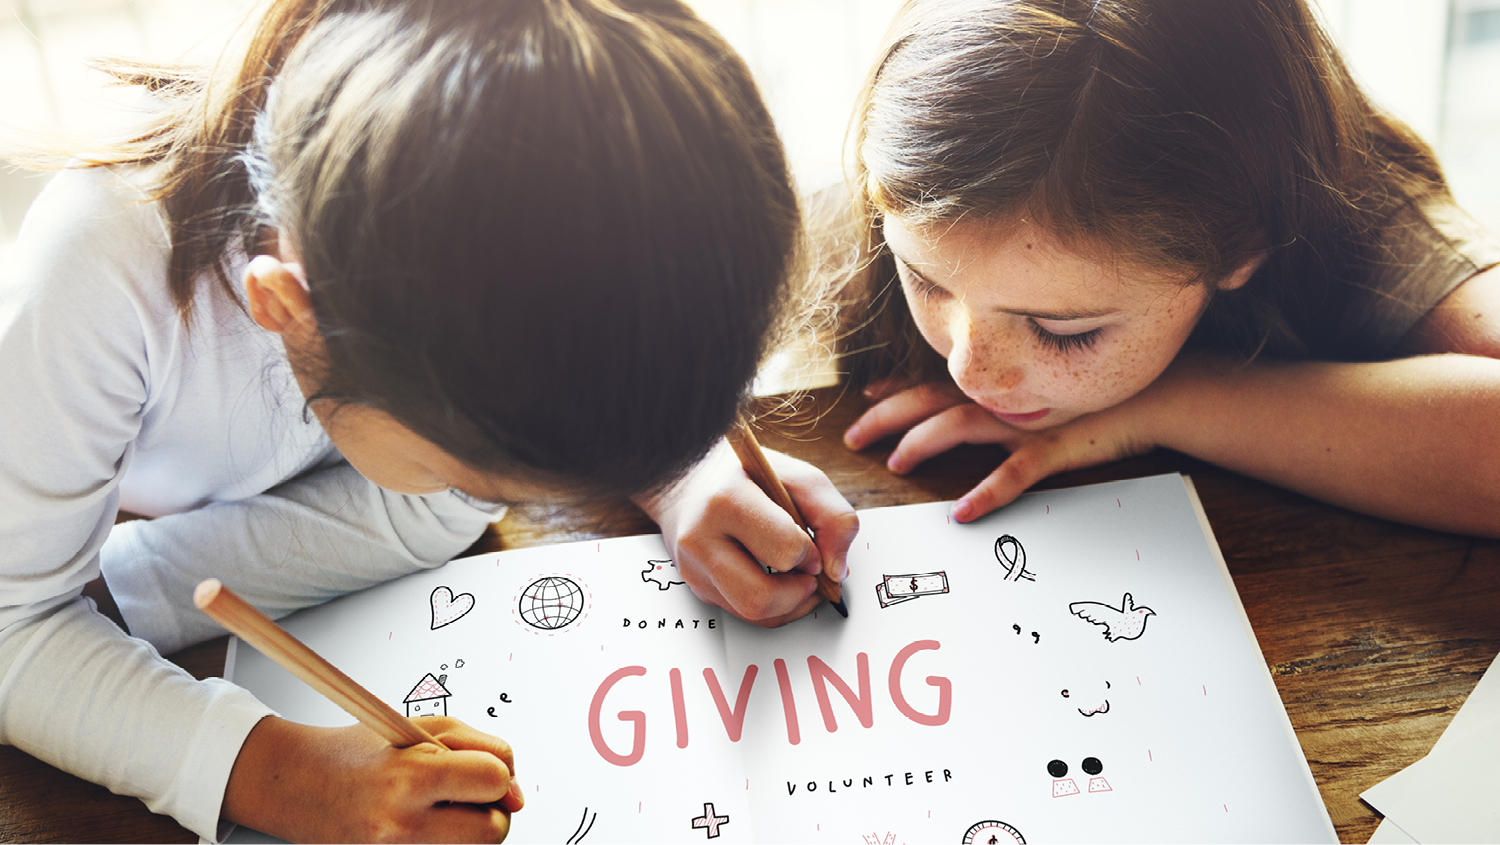 Two little girls lie on their stomachs, drawing on a sheet of white paper that says "Giving" and "volunteer" on it. 